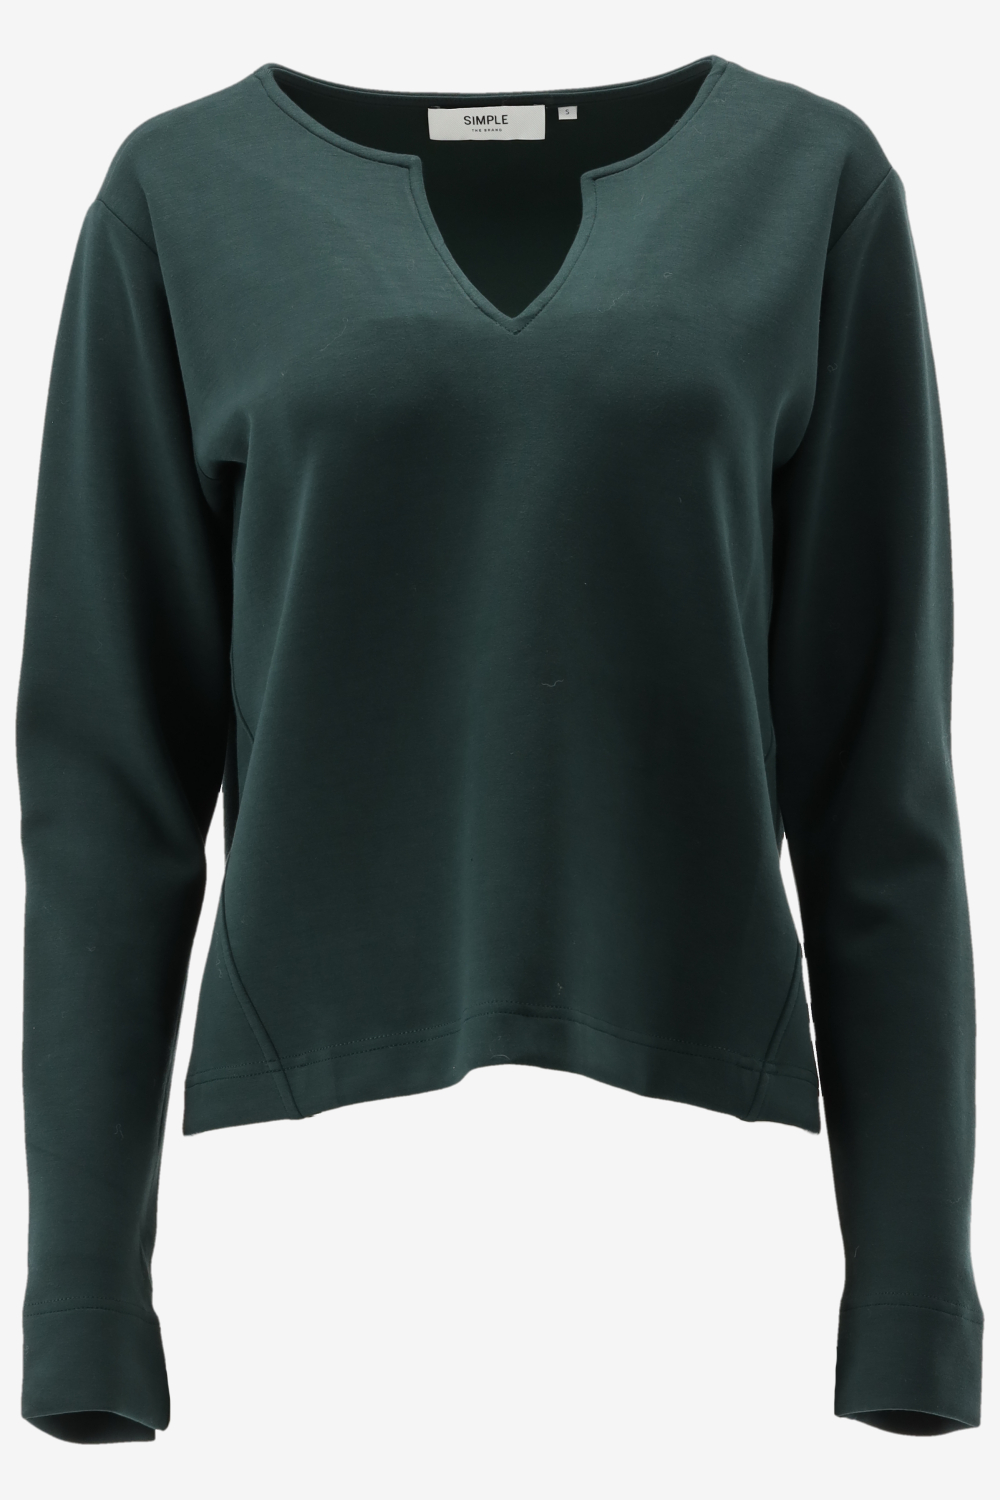 Simple Maddy Jer-modal-22-3 Tops & T-shirts - Groen